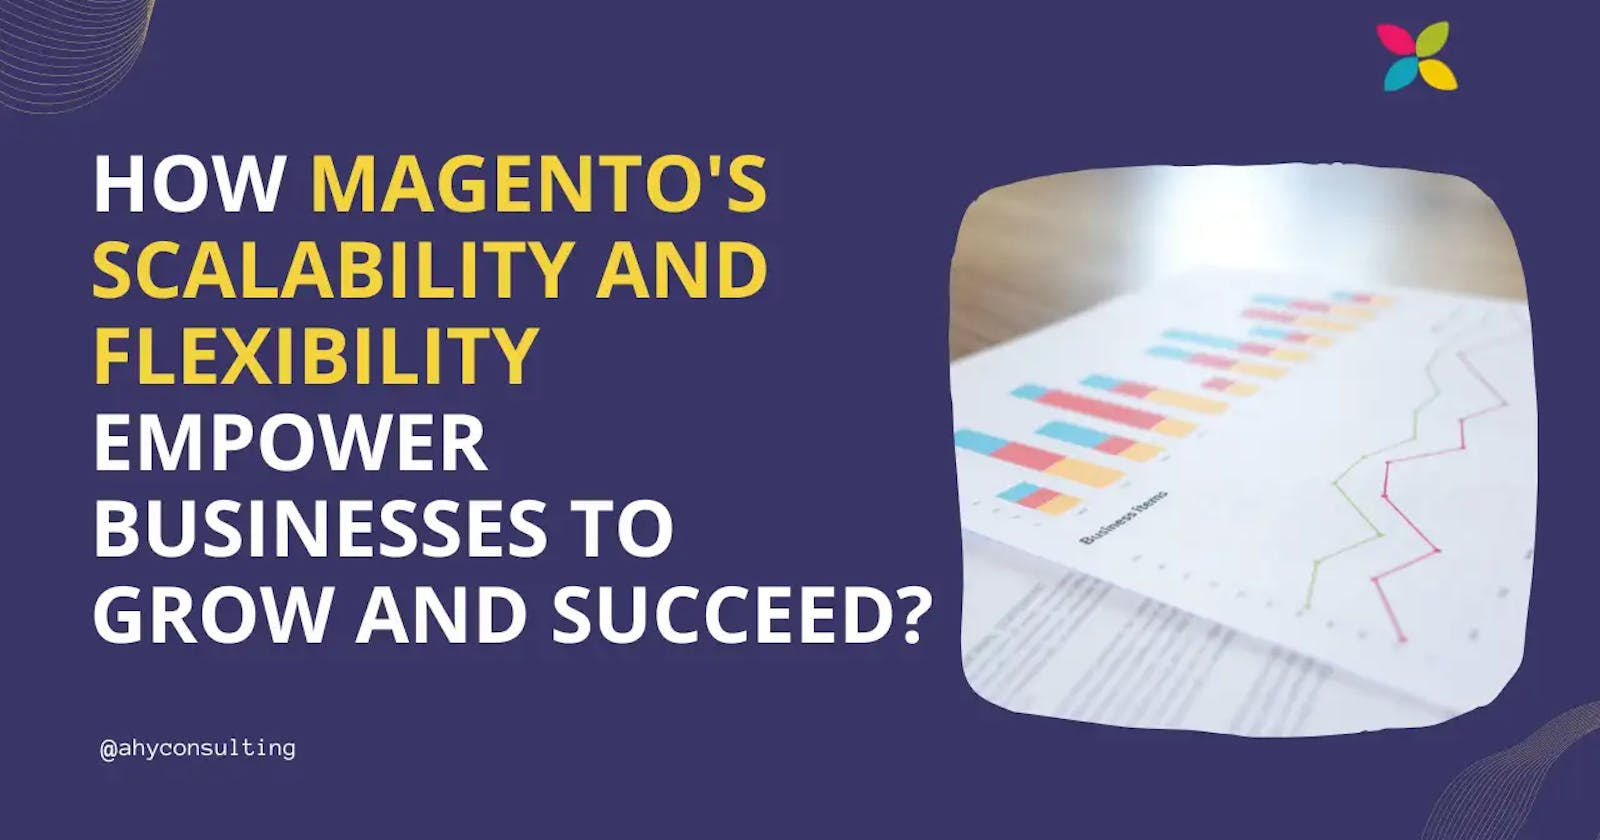 Enterprise eCommerce: How Magento's Scalability and Flexibility Empower Businesses to Grow and Succeed